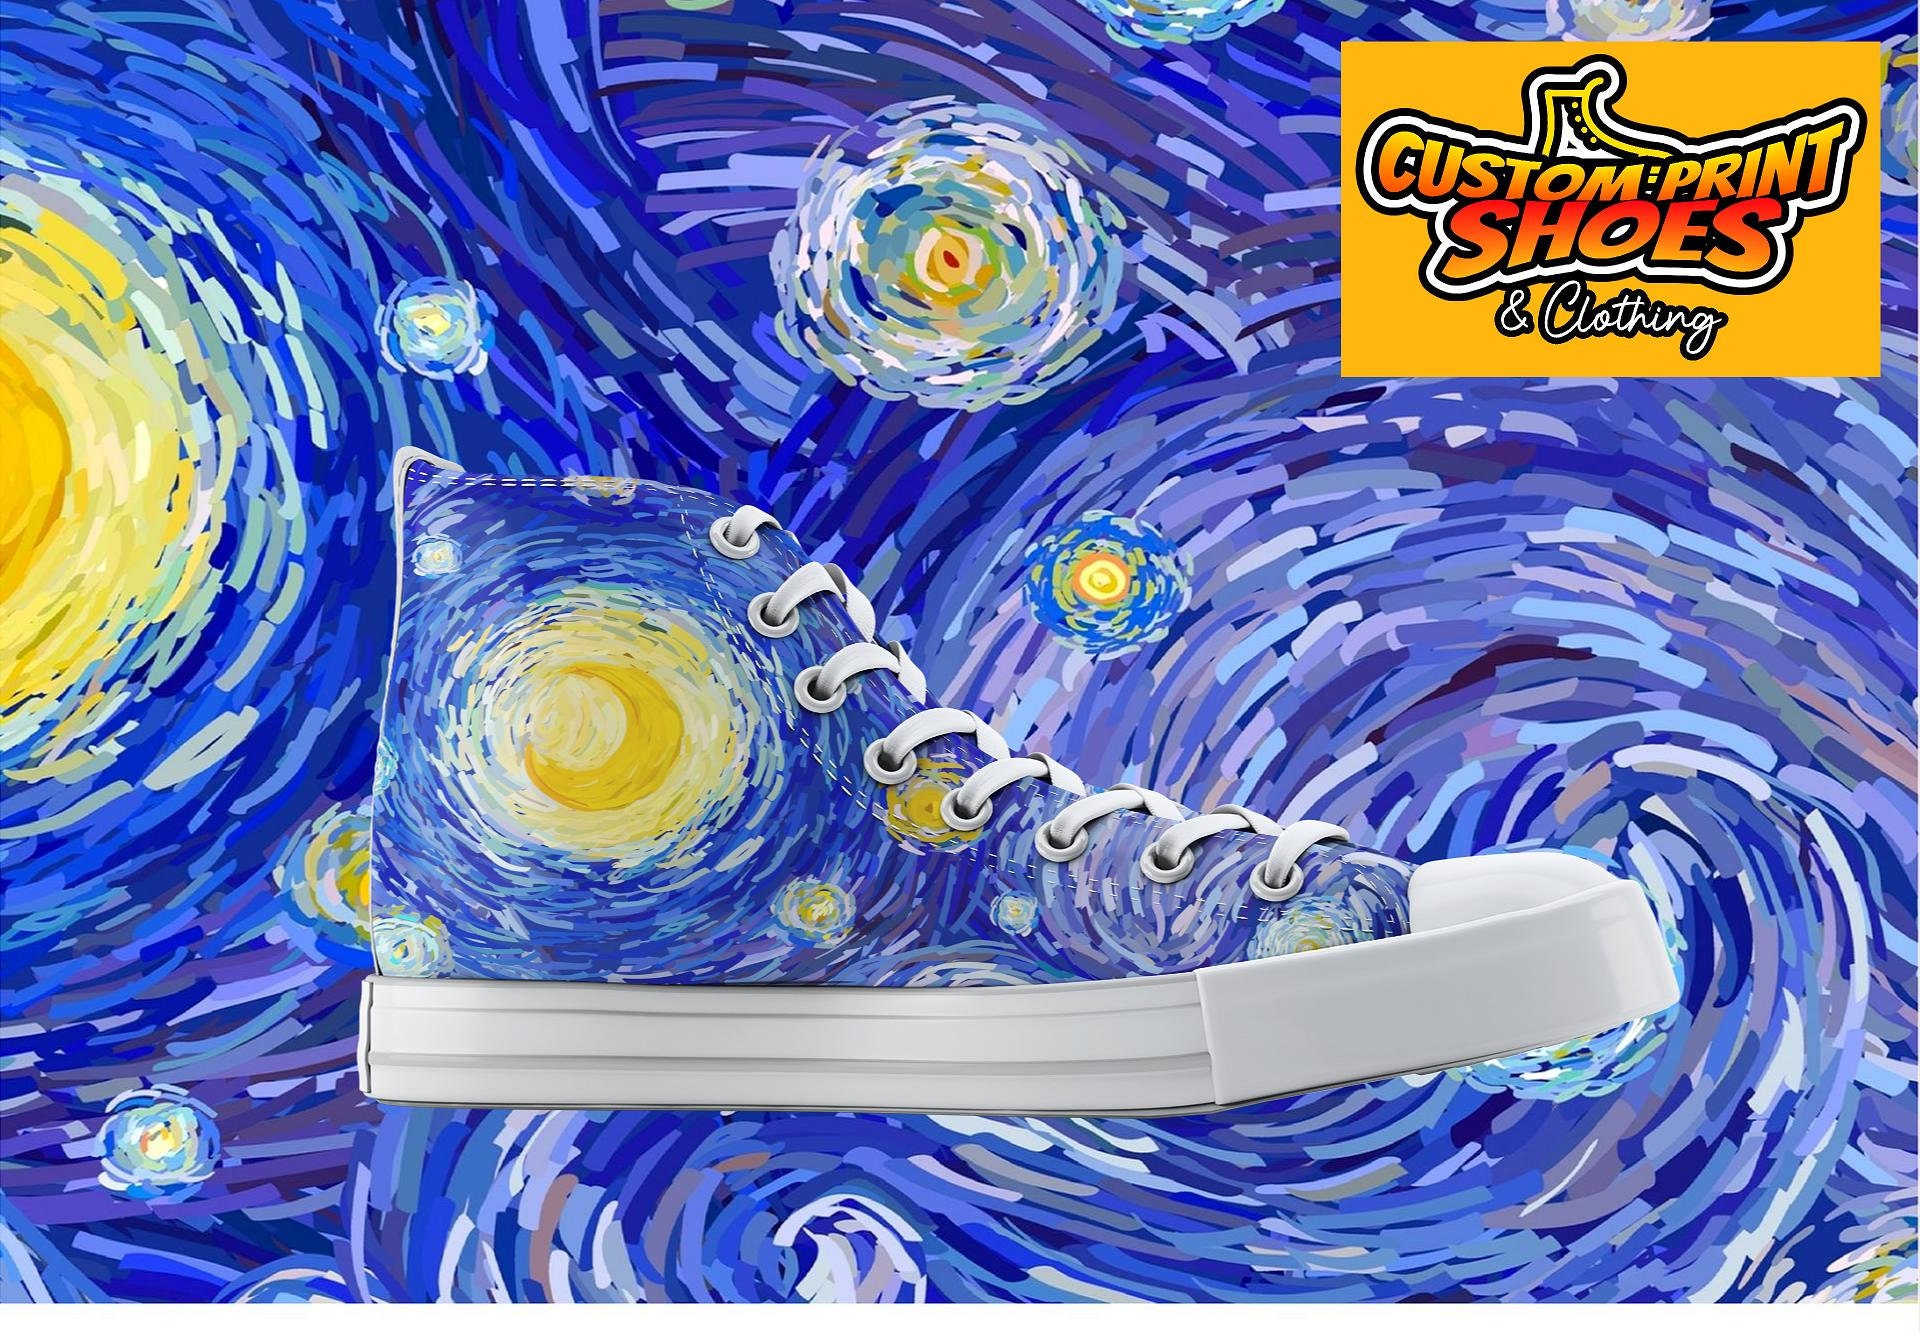 Design Your Own Canvas Shoes Trainers Craft Kits, Kids to Adult, With  Acrylic Paint Pens and Fun Laces to Match You Design. 